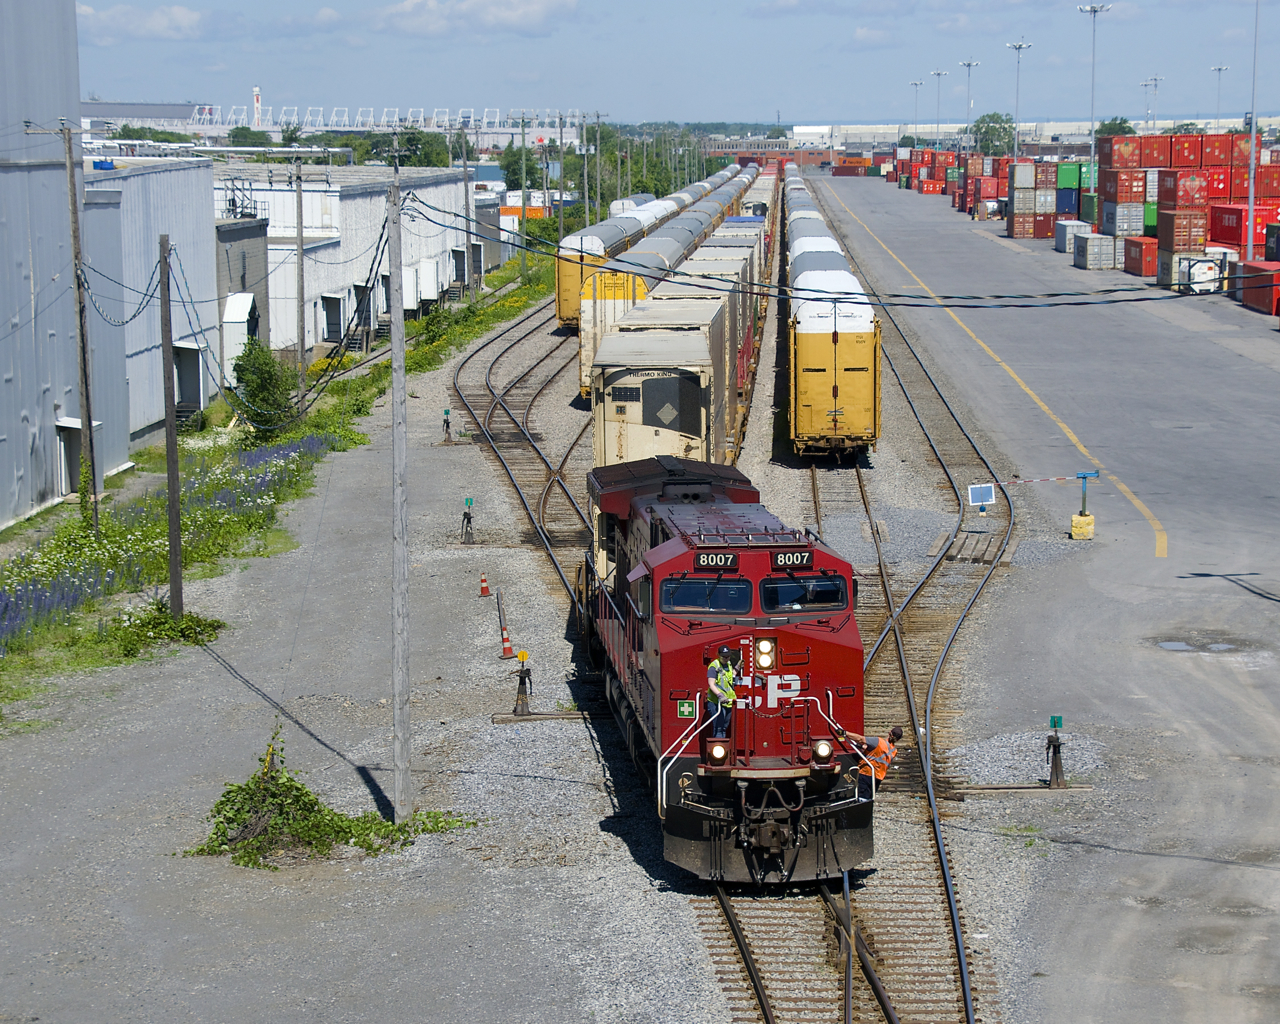 CP 112 is arriving in Lachine IMS as it passes tracks full of stored autoracks.